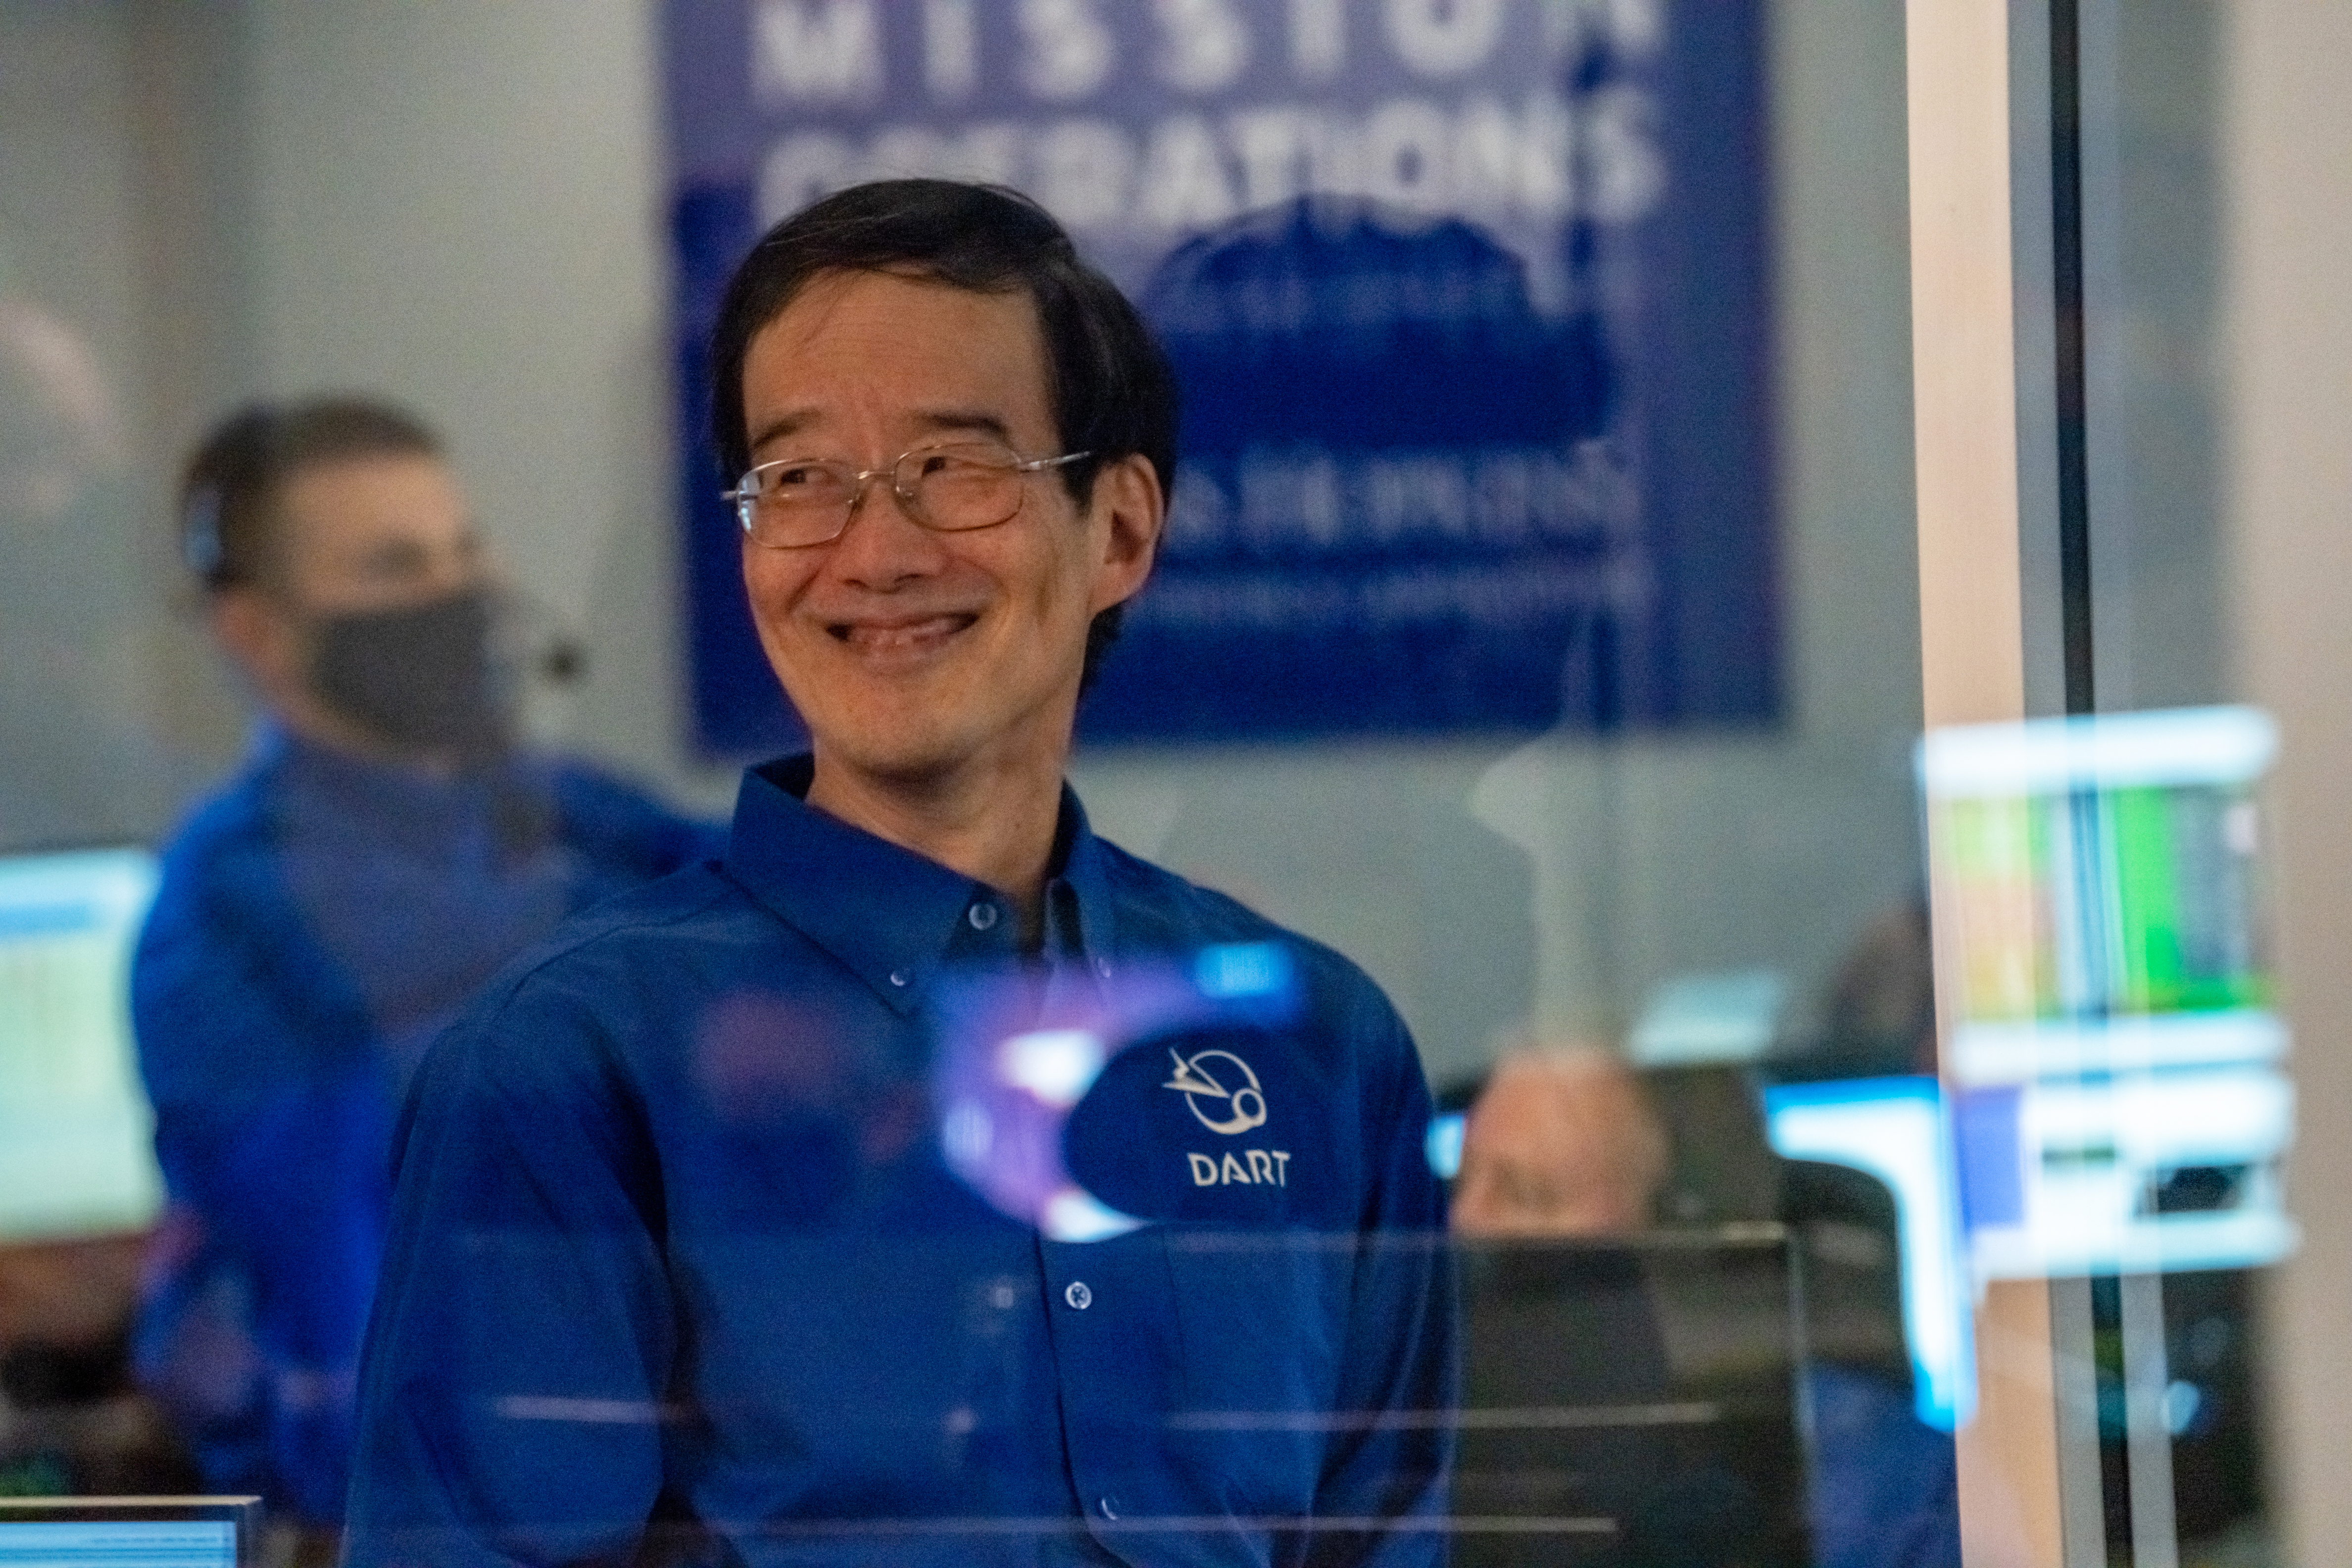 Andy Cheng wearing his blue DART shirt smiles after DART's launch